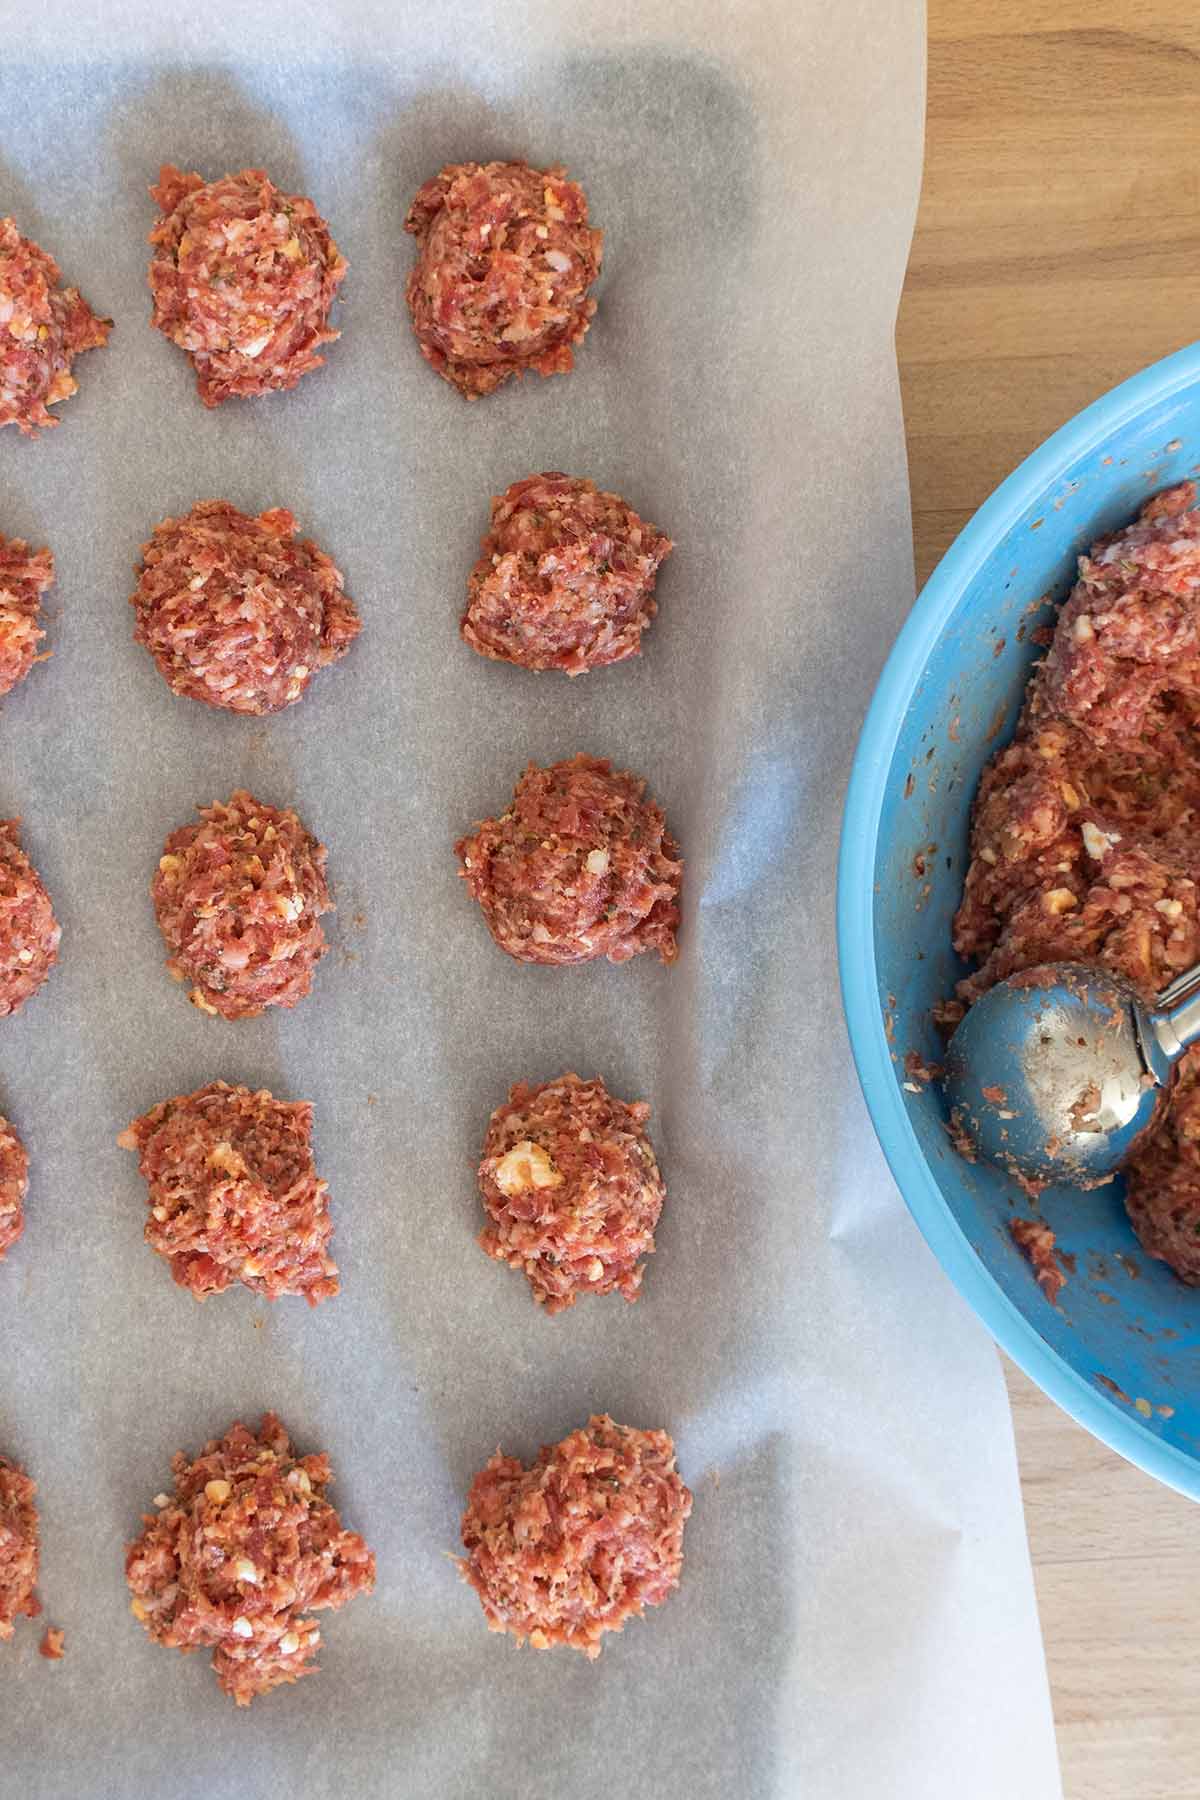 uncooked meatballs on a baking sheet lined with parchment paper